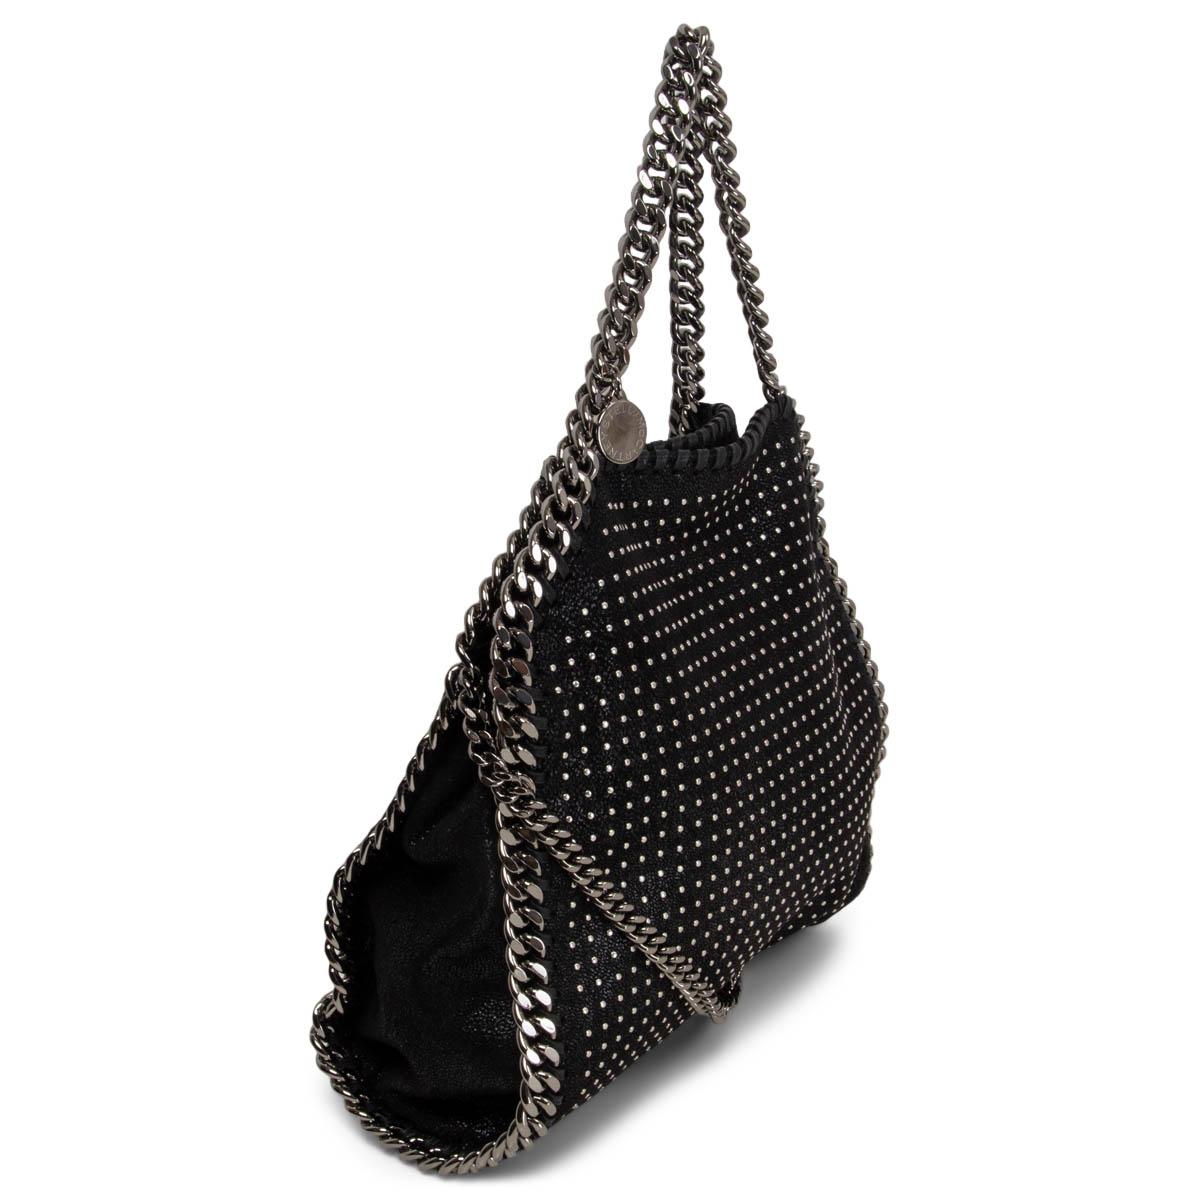 100% authentic Stella McCartney studded 'Falabella Mini' fold-over tote bag in black shaggy deer faux leather. Features the signature logo and a silver-tone hardware. Opens with a magnetic button and has a small interior pocket. Lined in pink logo